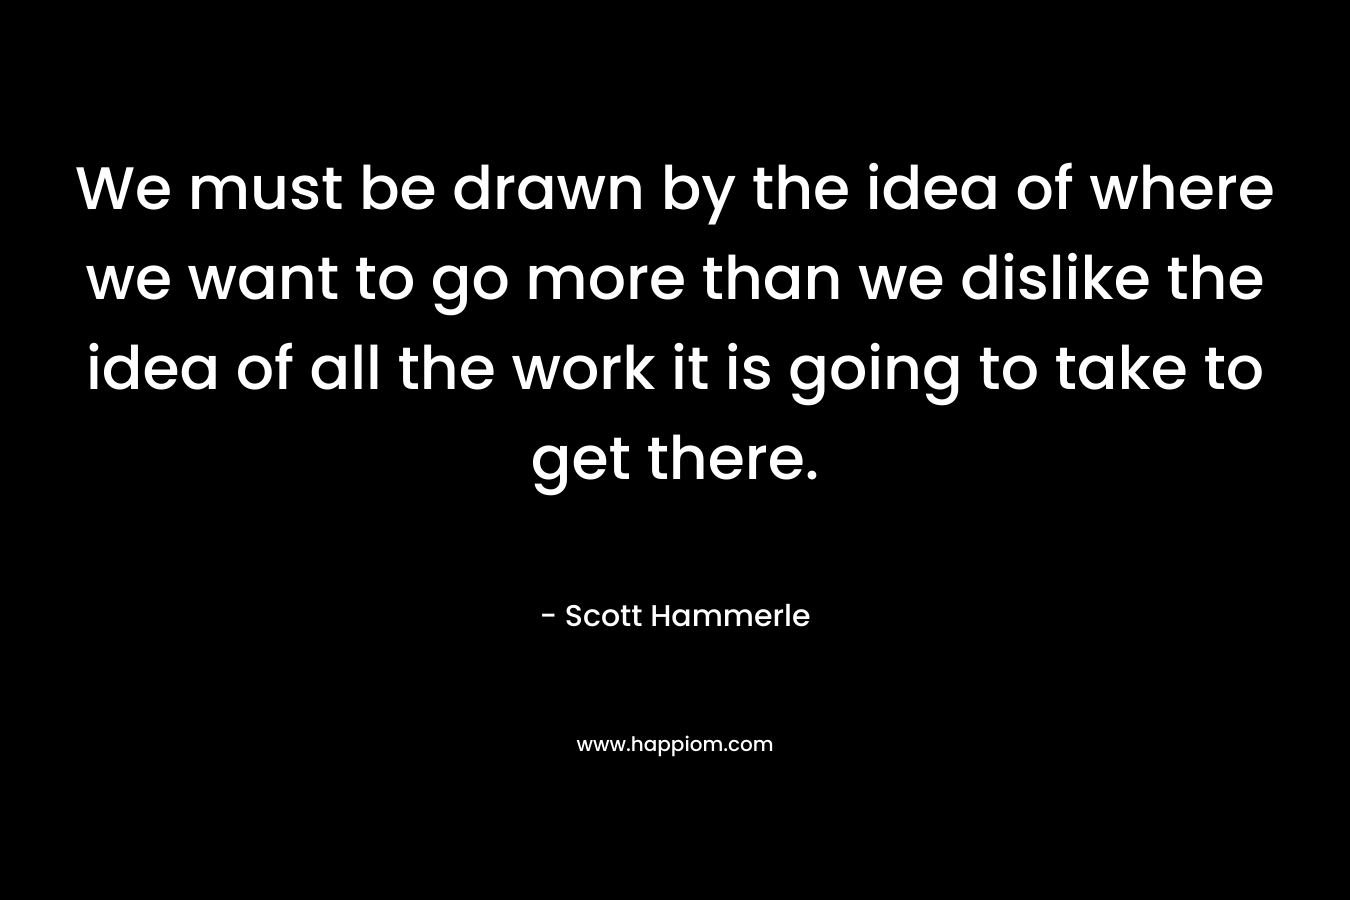 We must be drawn by the idea of where we want to go more than we dislike the idea of all the work it is going to take to get there.